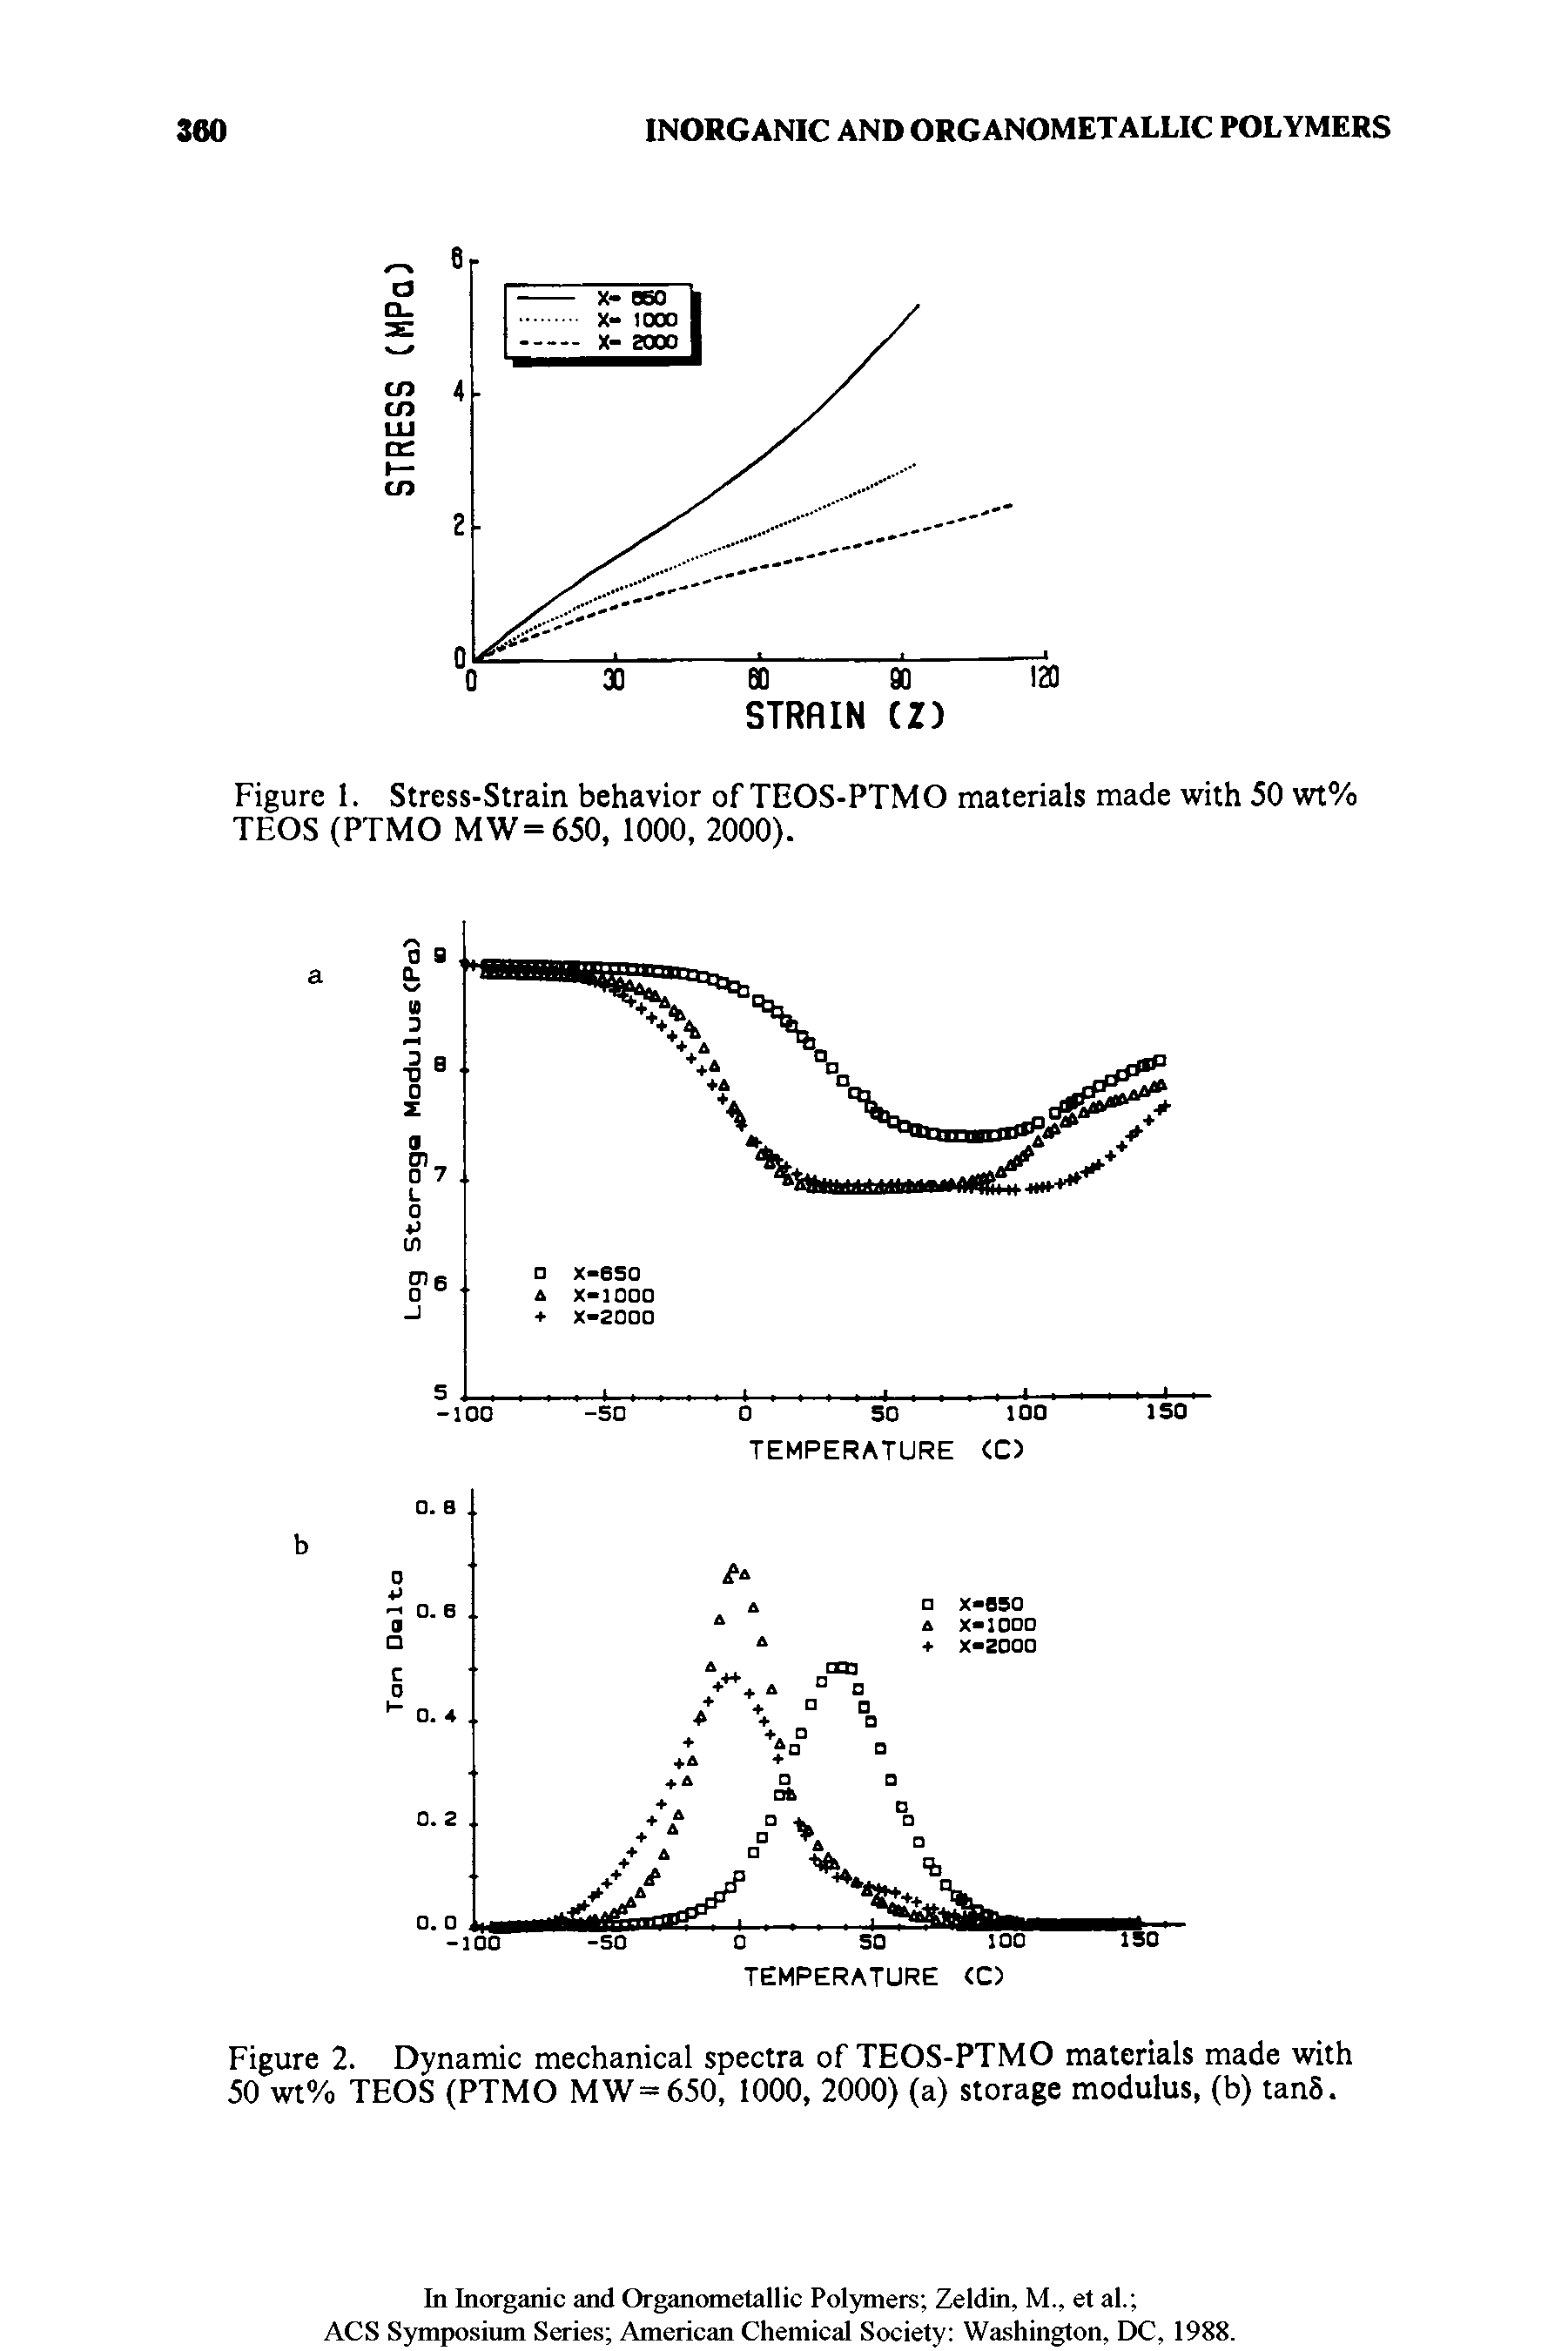 Figure 2. Dynamic mechanical spectra of TEOS-PTMO materials made with 50 wt% TEOS (PTMO MW=650, 1000, 2000) (a) storage modulus, (b) tan8.